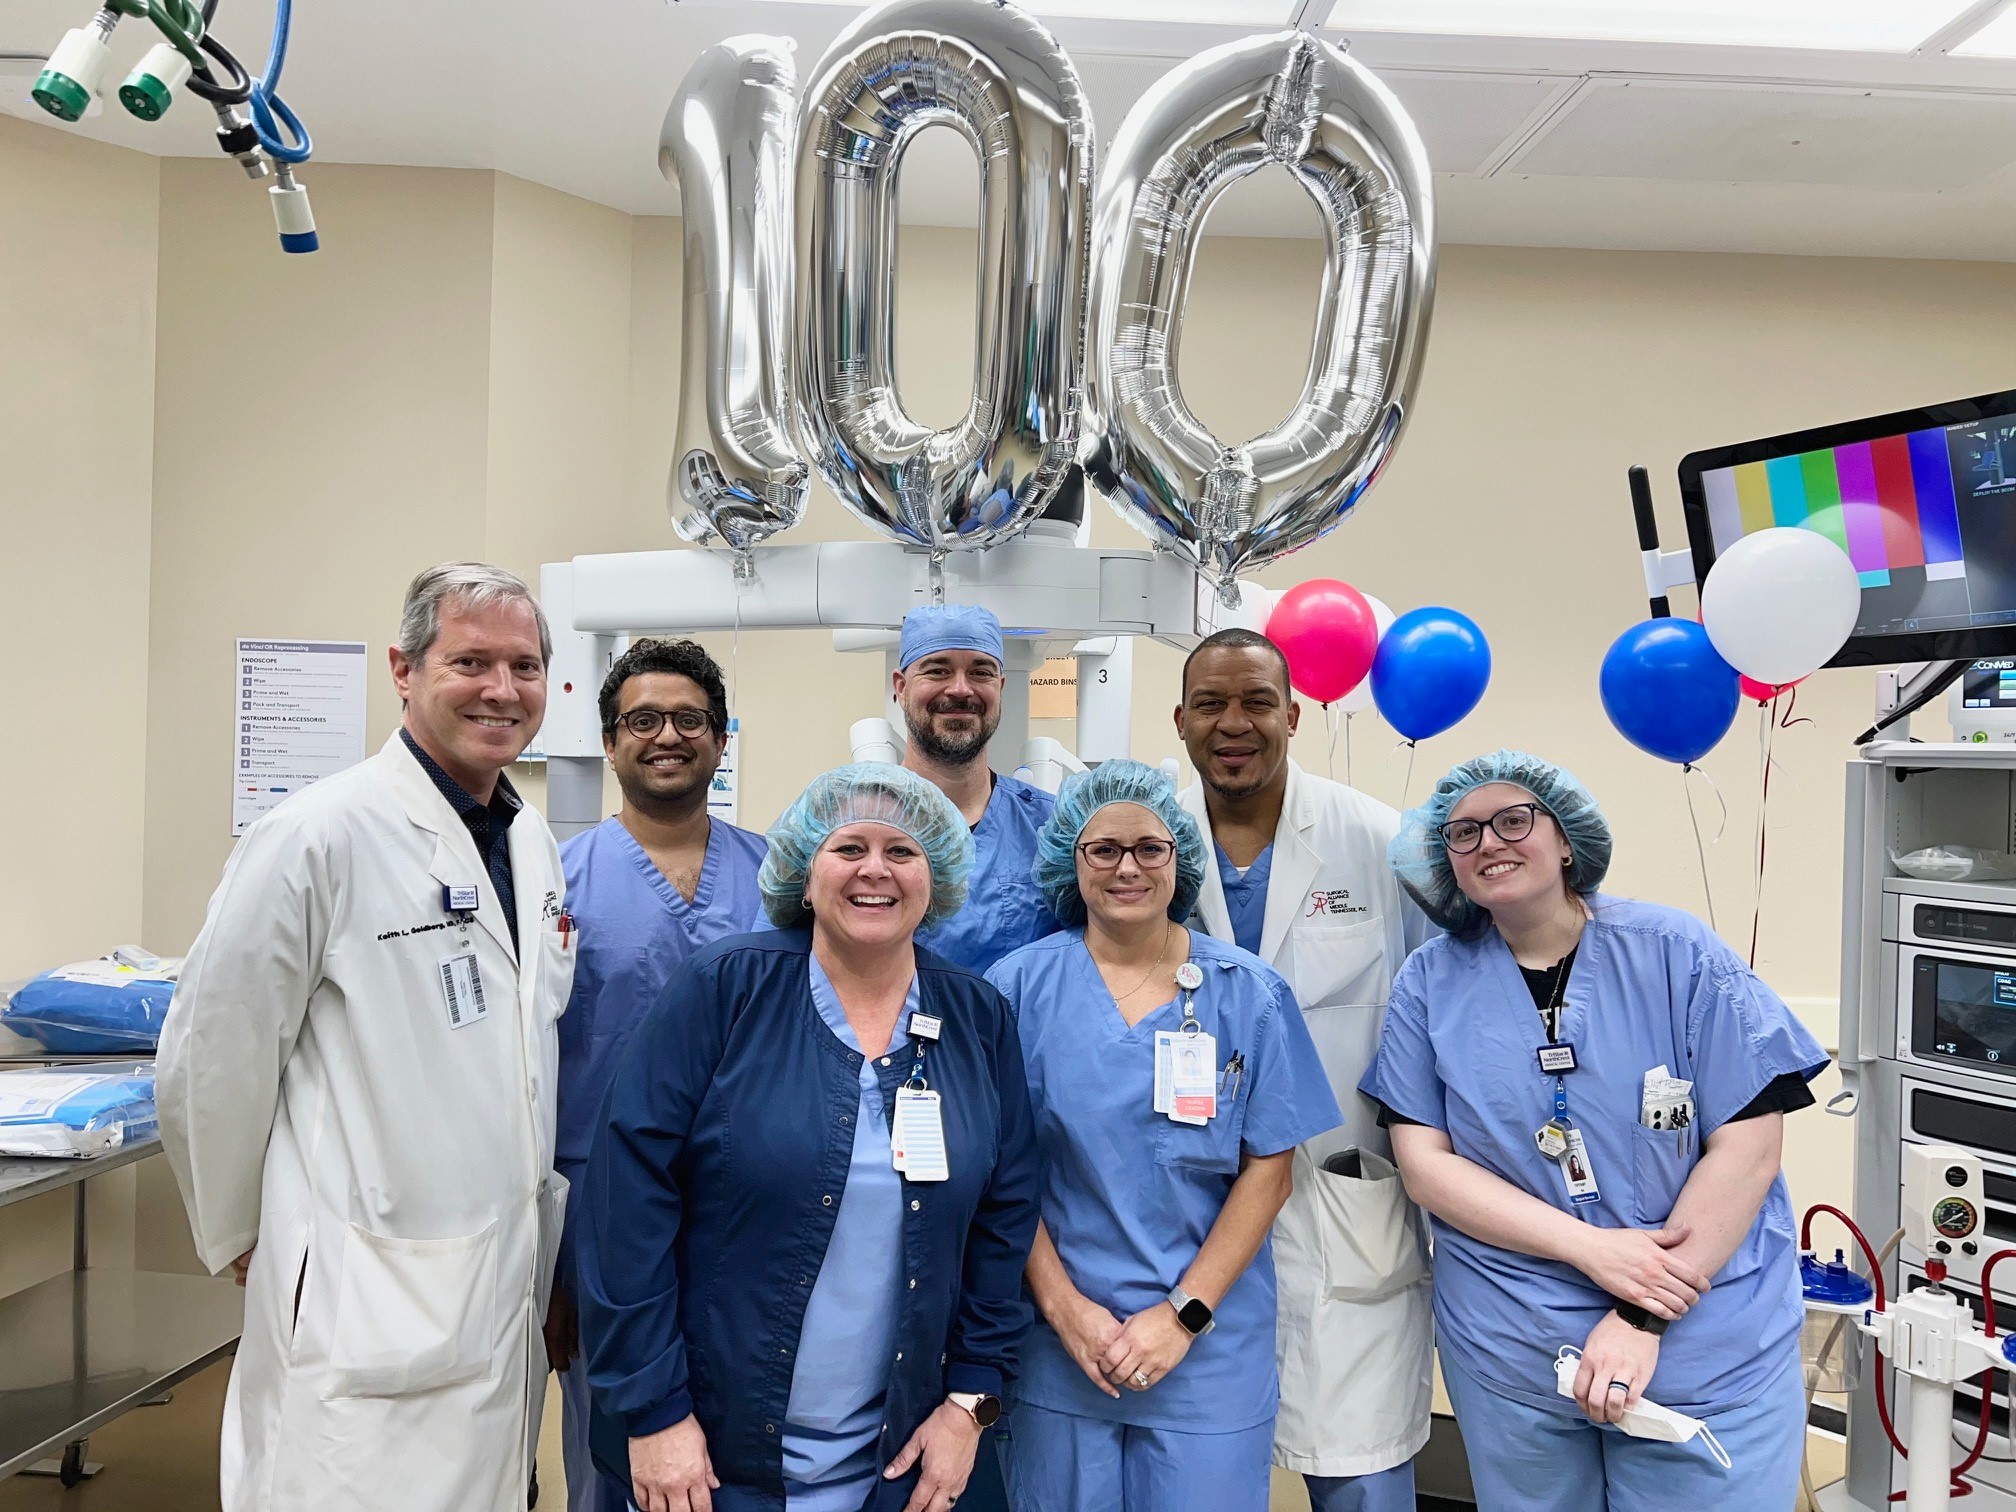 Robotic Surgeons and staff pose in operating room in front of "100" balloons.